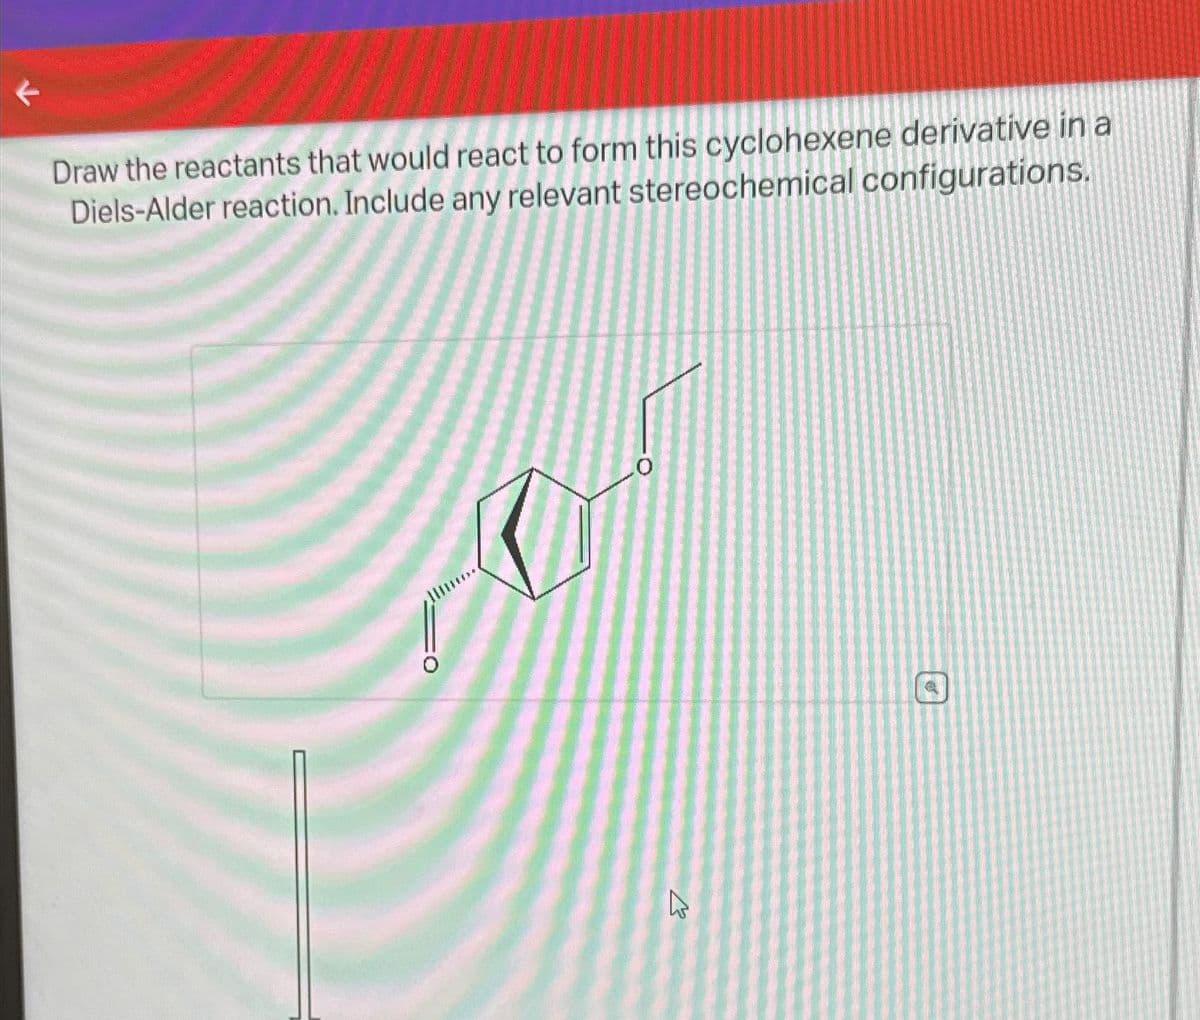 J
Draw the reactants that would react to form this cyclohexene derivative in a
Diels-Alder reaction. Include any relevant stereochemical configurations.
0
E